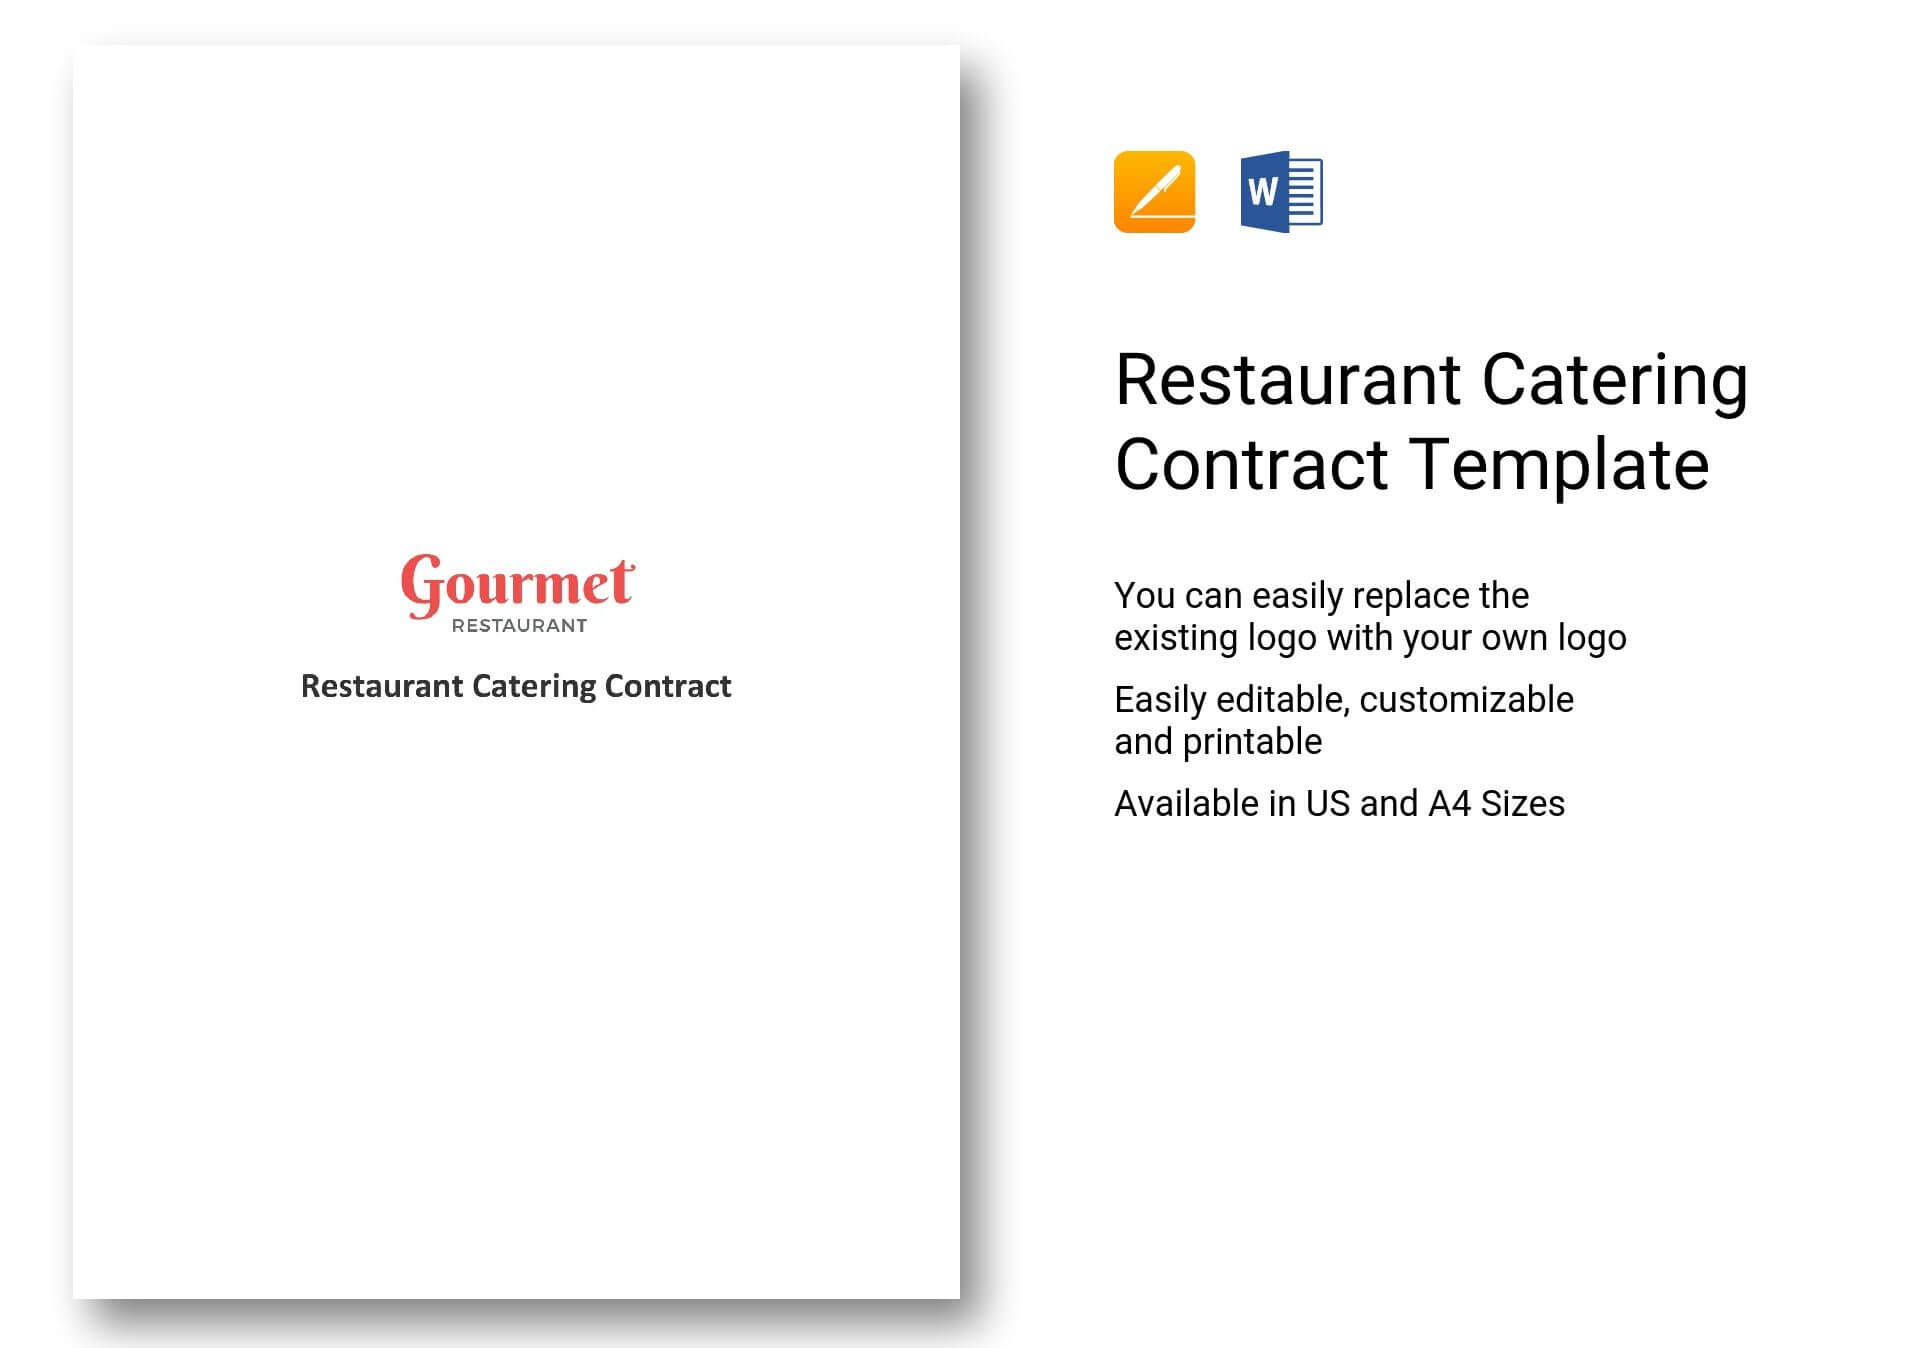 Restaurant Catering Contract Template In Word, Apple Pages With Catering Contract Template Word